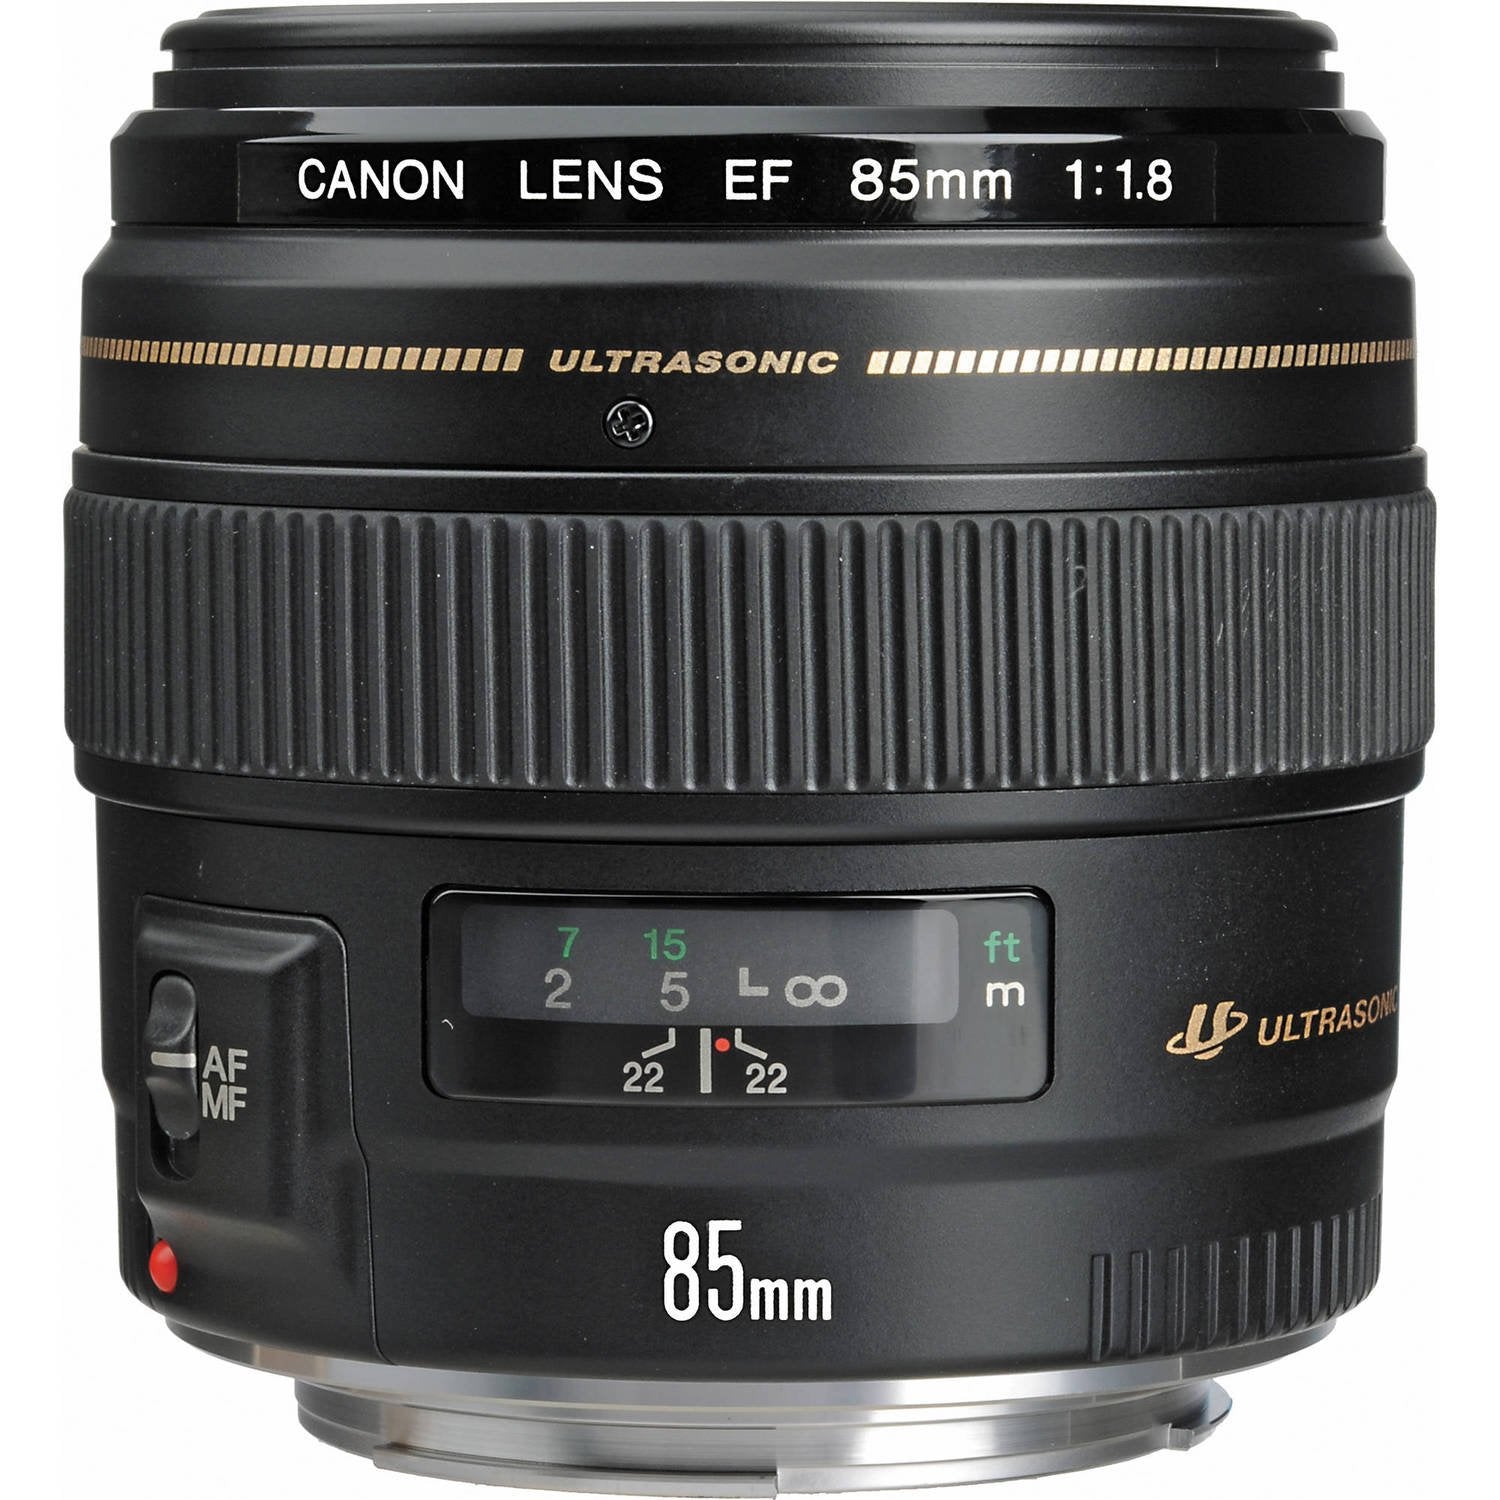 Canon 85MM F1.8 USM (58MM) Camera Lens + Cleaning Kit